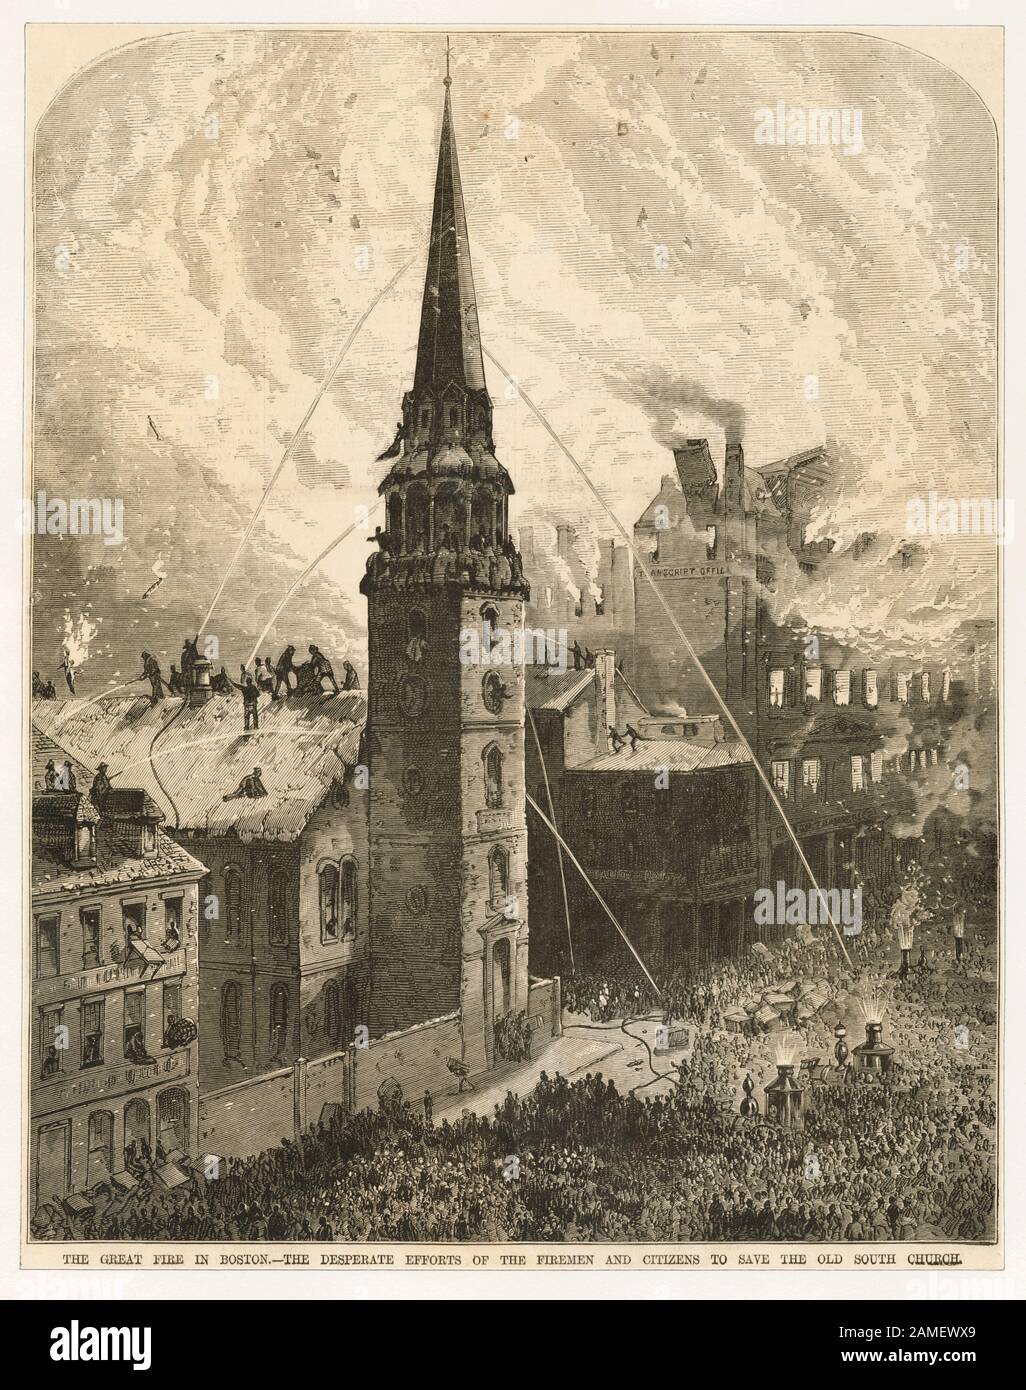 The great fire in Boston - the desperate attempts of the firemen and citizens to save the Old South Church  EM2053; The great fire in Boston : the desperate attempts of the firemen and citizens to save the Old South Church. Stock Photo